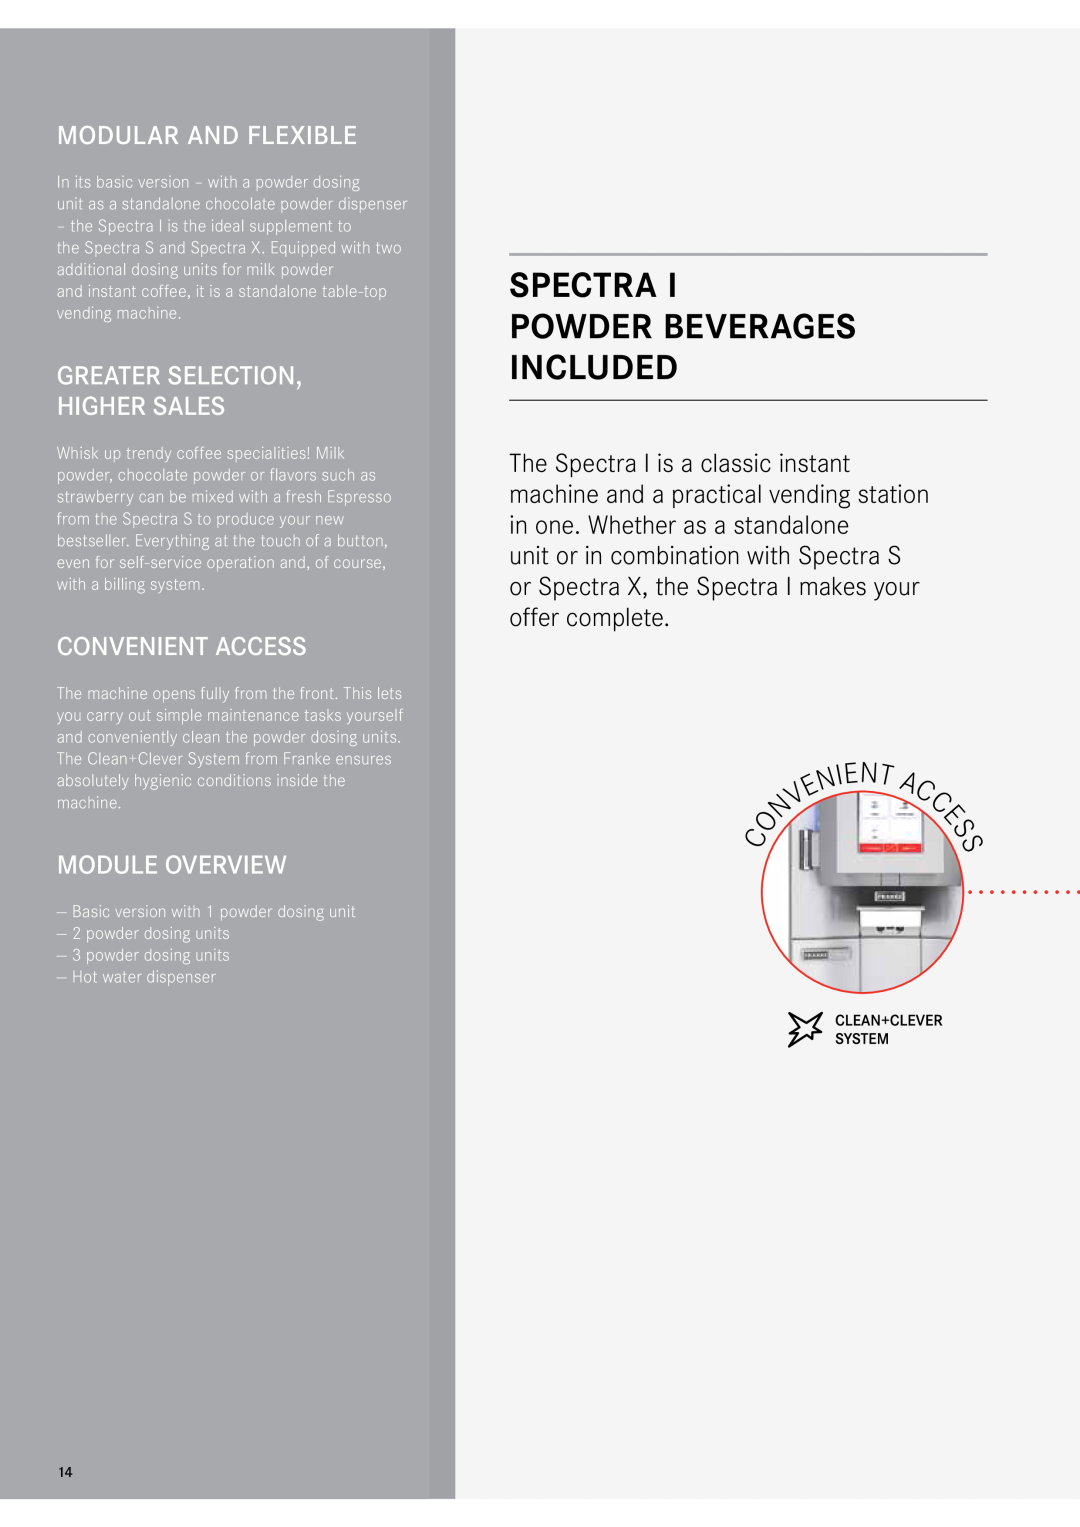 Franke Consumer Products 471086A1 Spectra Powder beverages included, Modular And Flexible, Greater Selection Higher Sales 